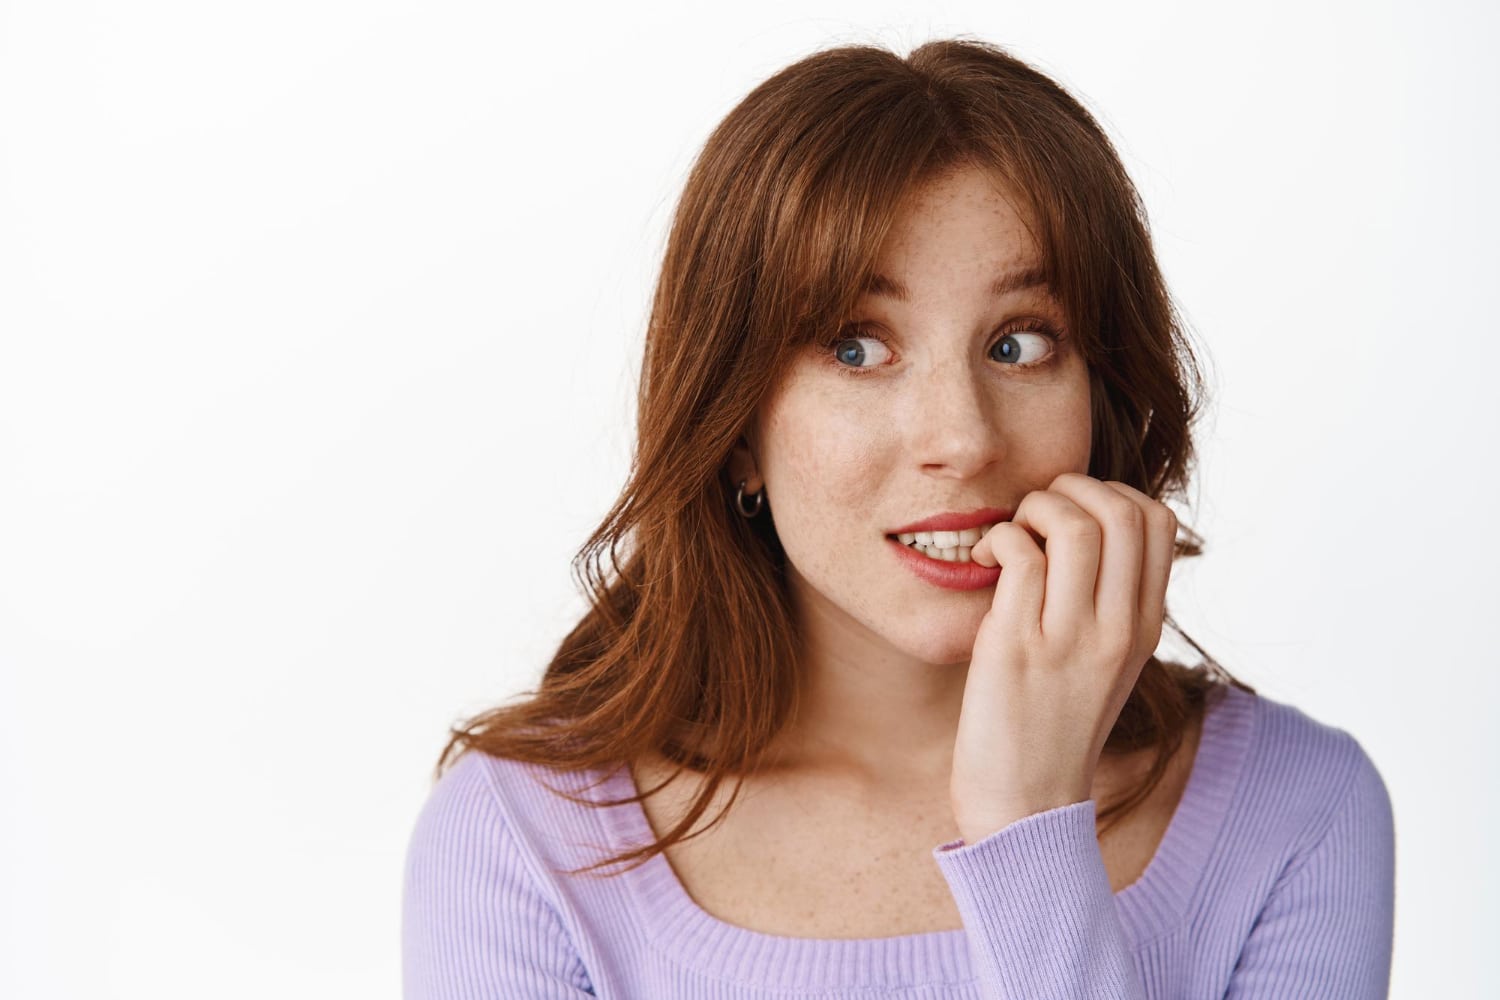 Cracked tooth: Causes, Types and Treatment